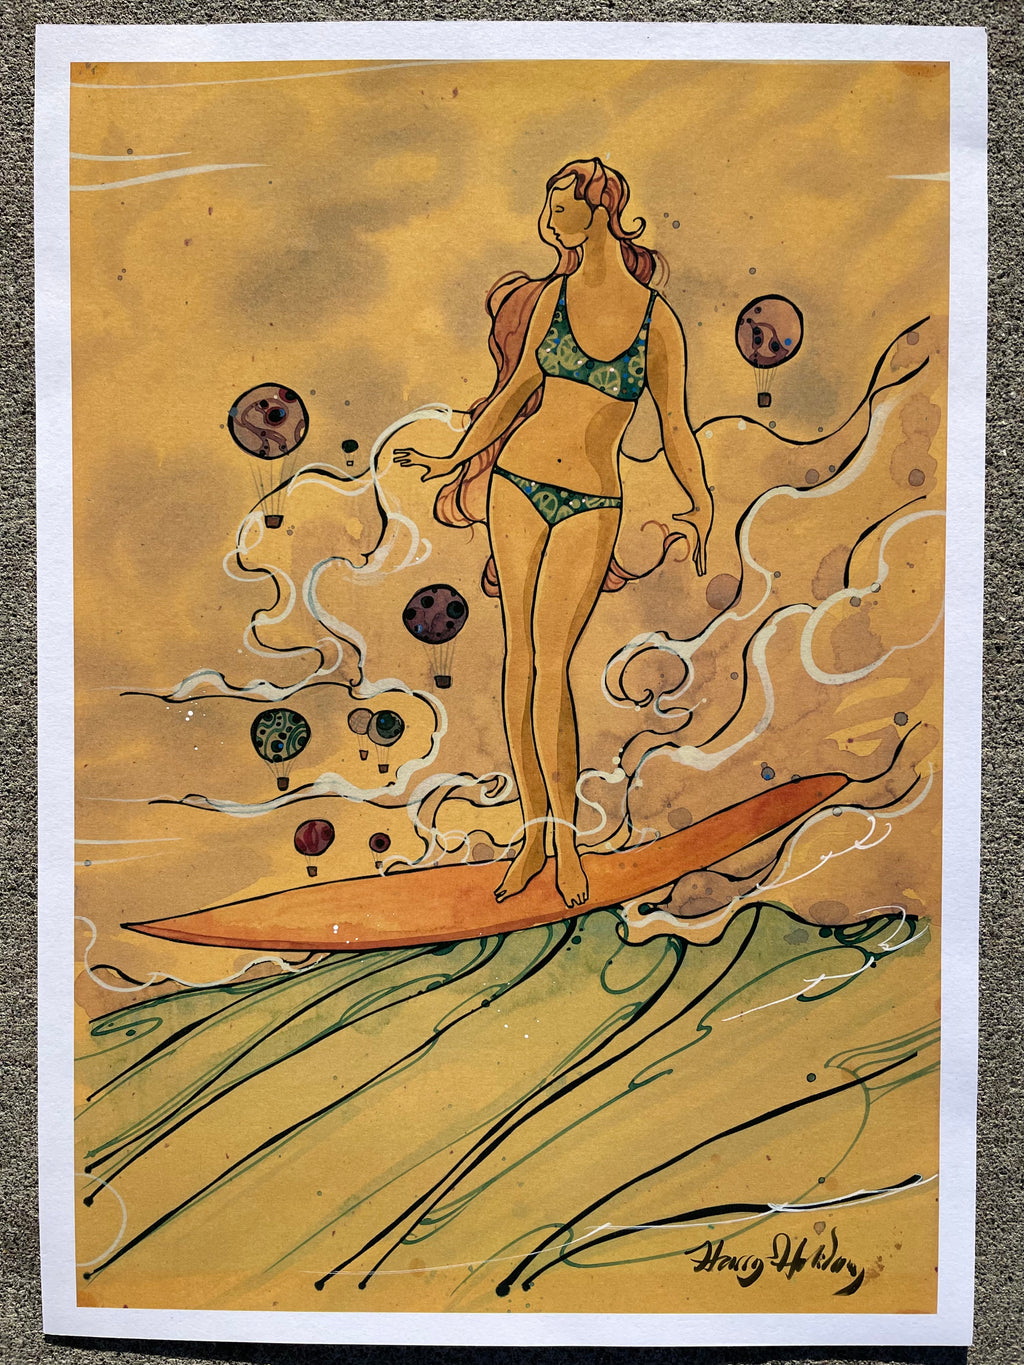 Surfer Chic 2 by Harry Holiday Art Print